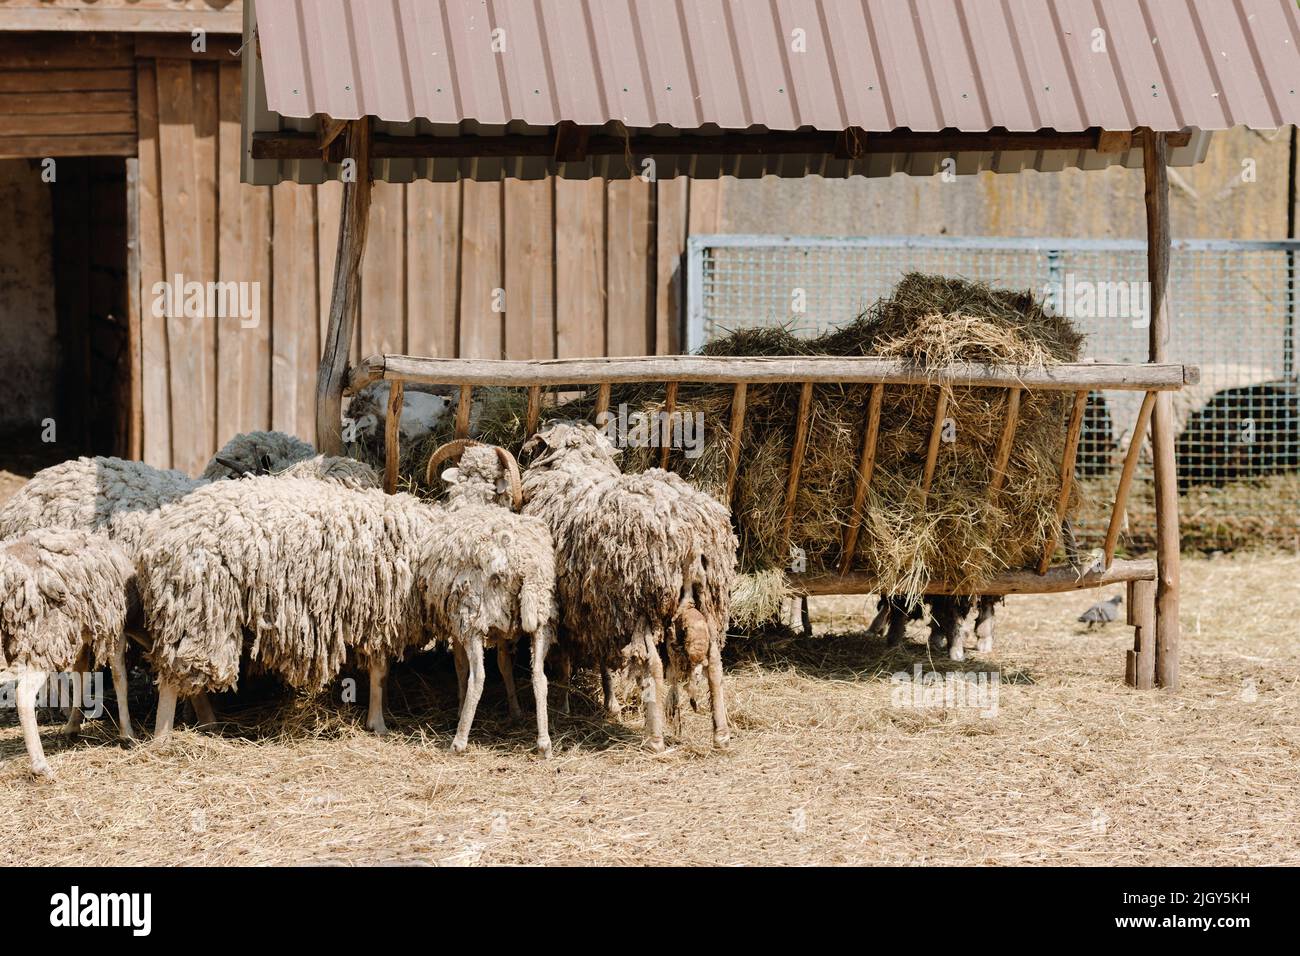 Many sheep eat hay from a wooden feeder on a farm. High quality photo Stock Photo